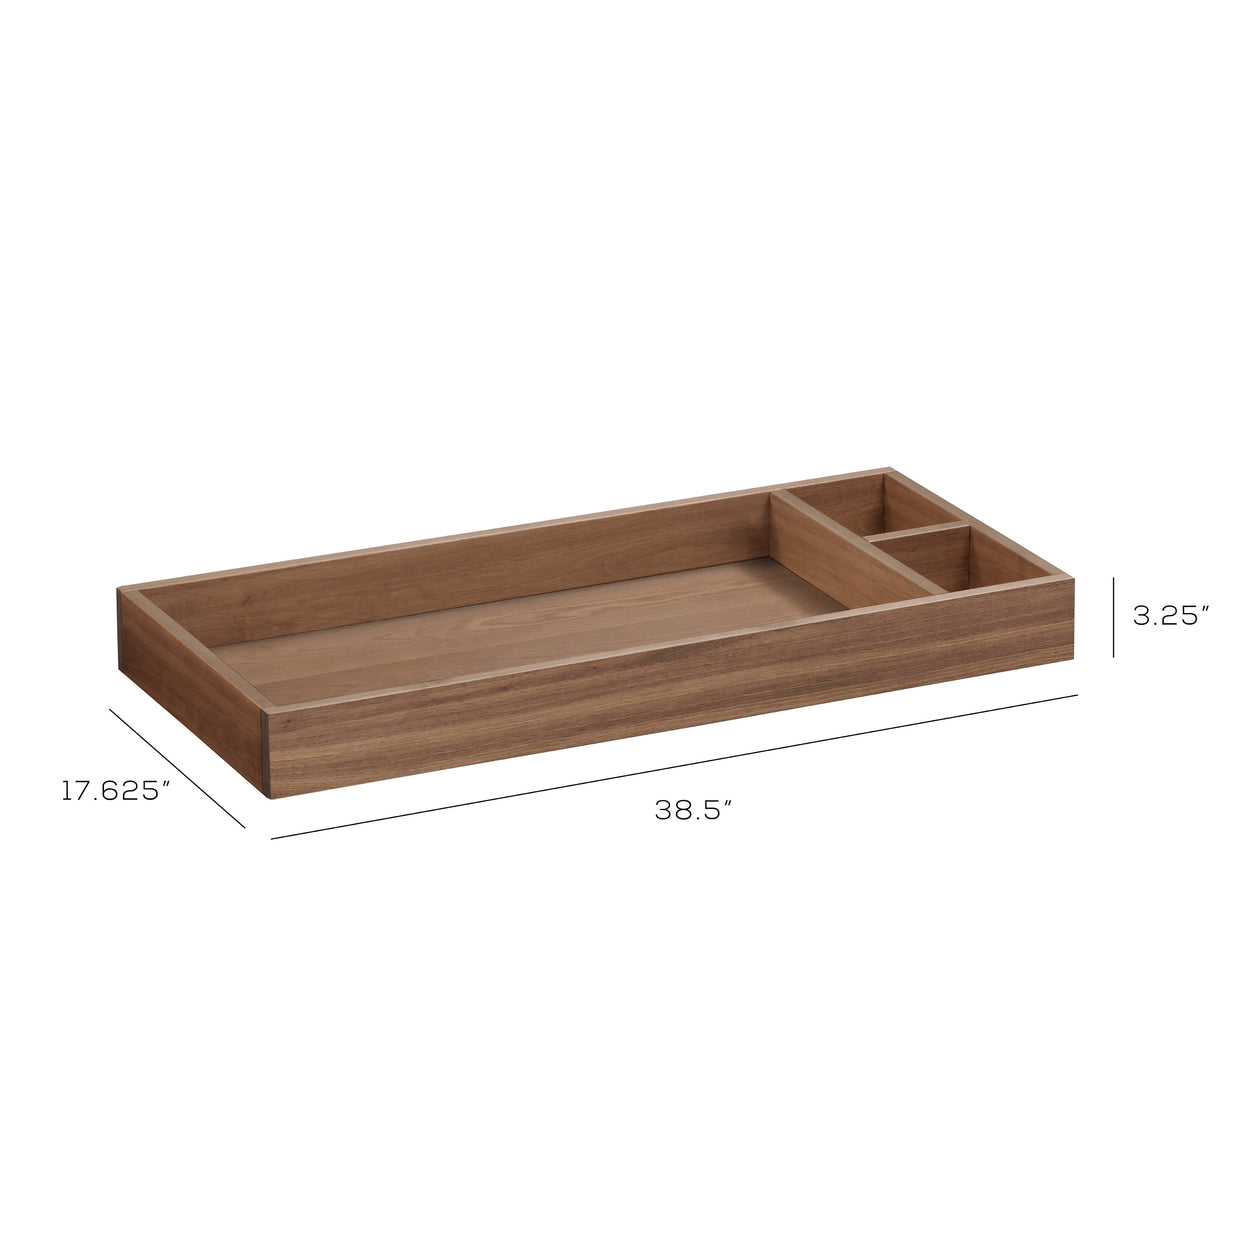 UB0319UL,Removable Changer Tray for Nifty in Walnut Finish